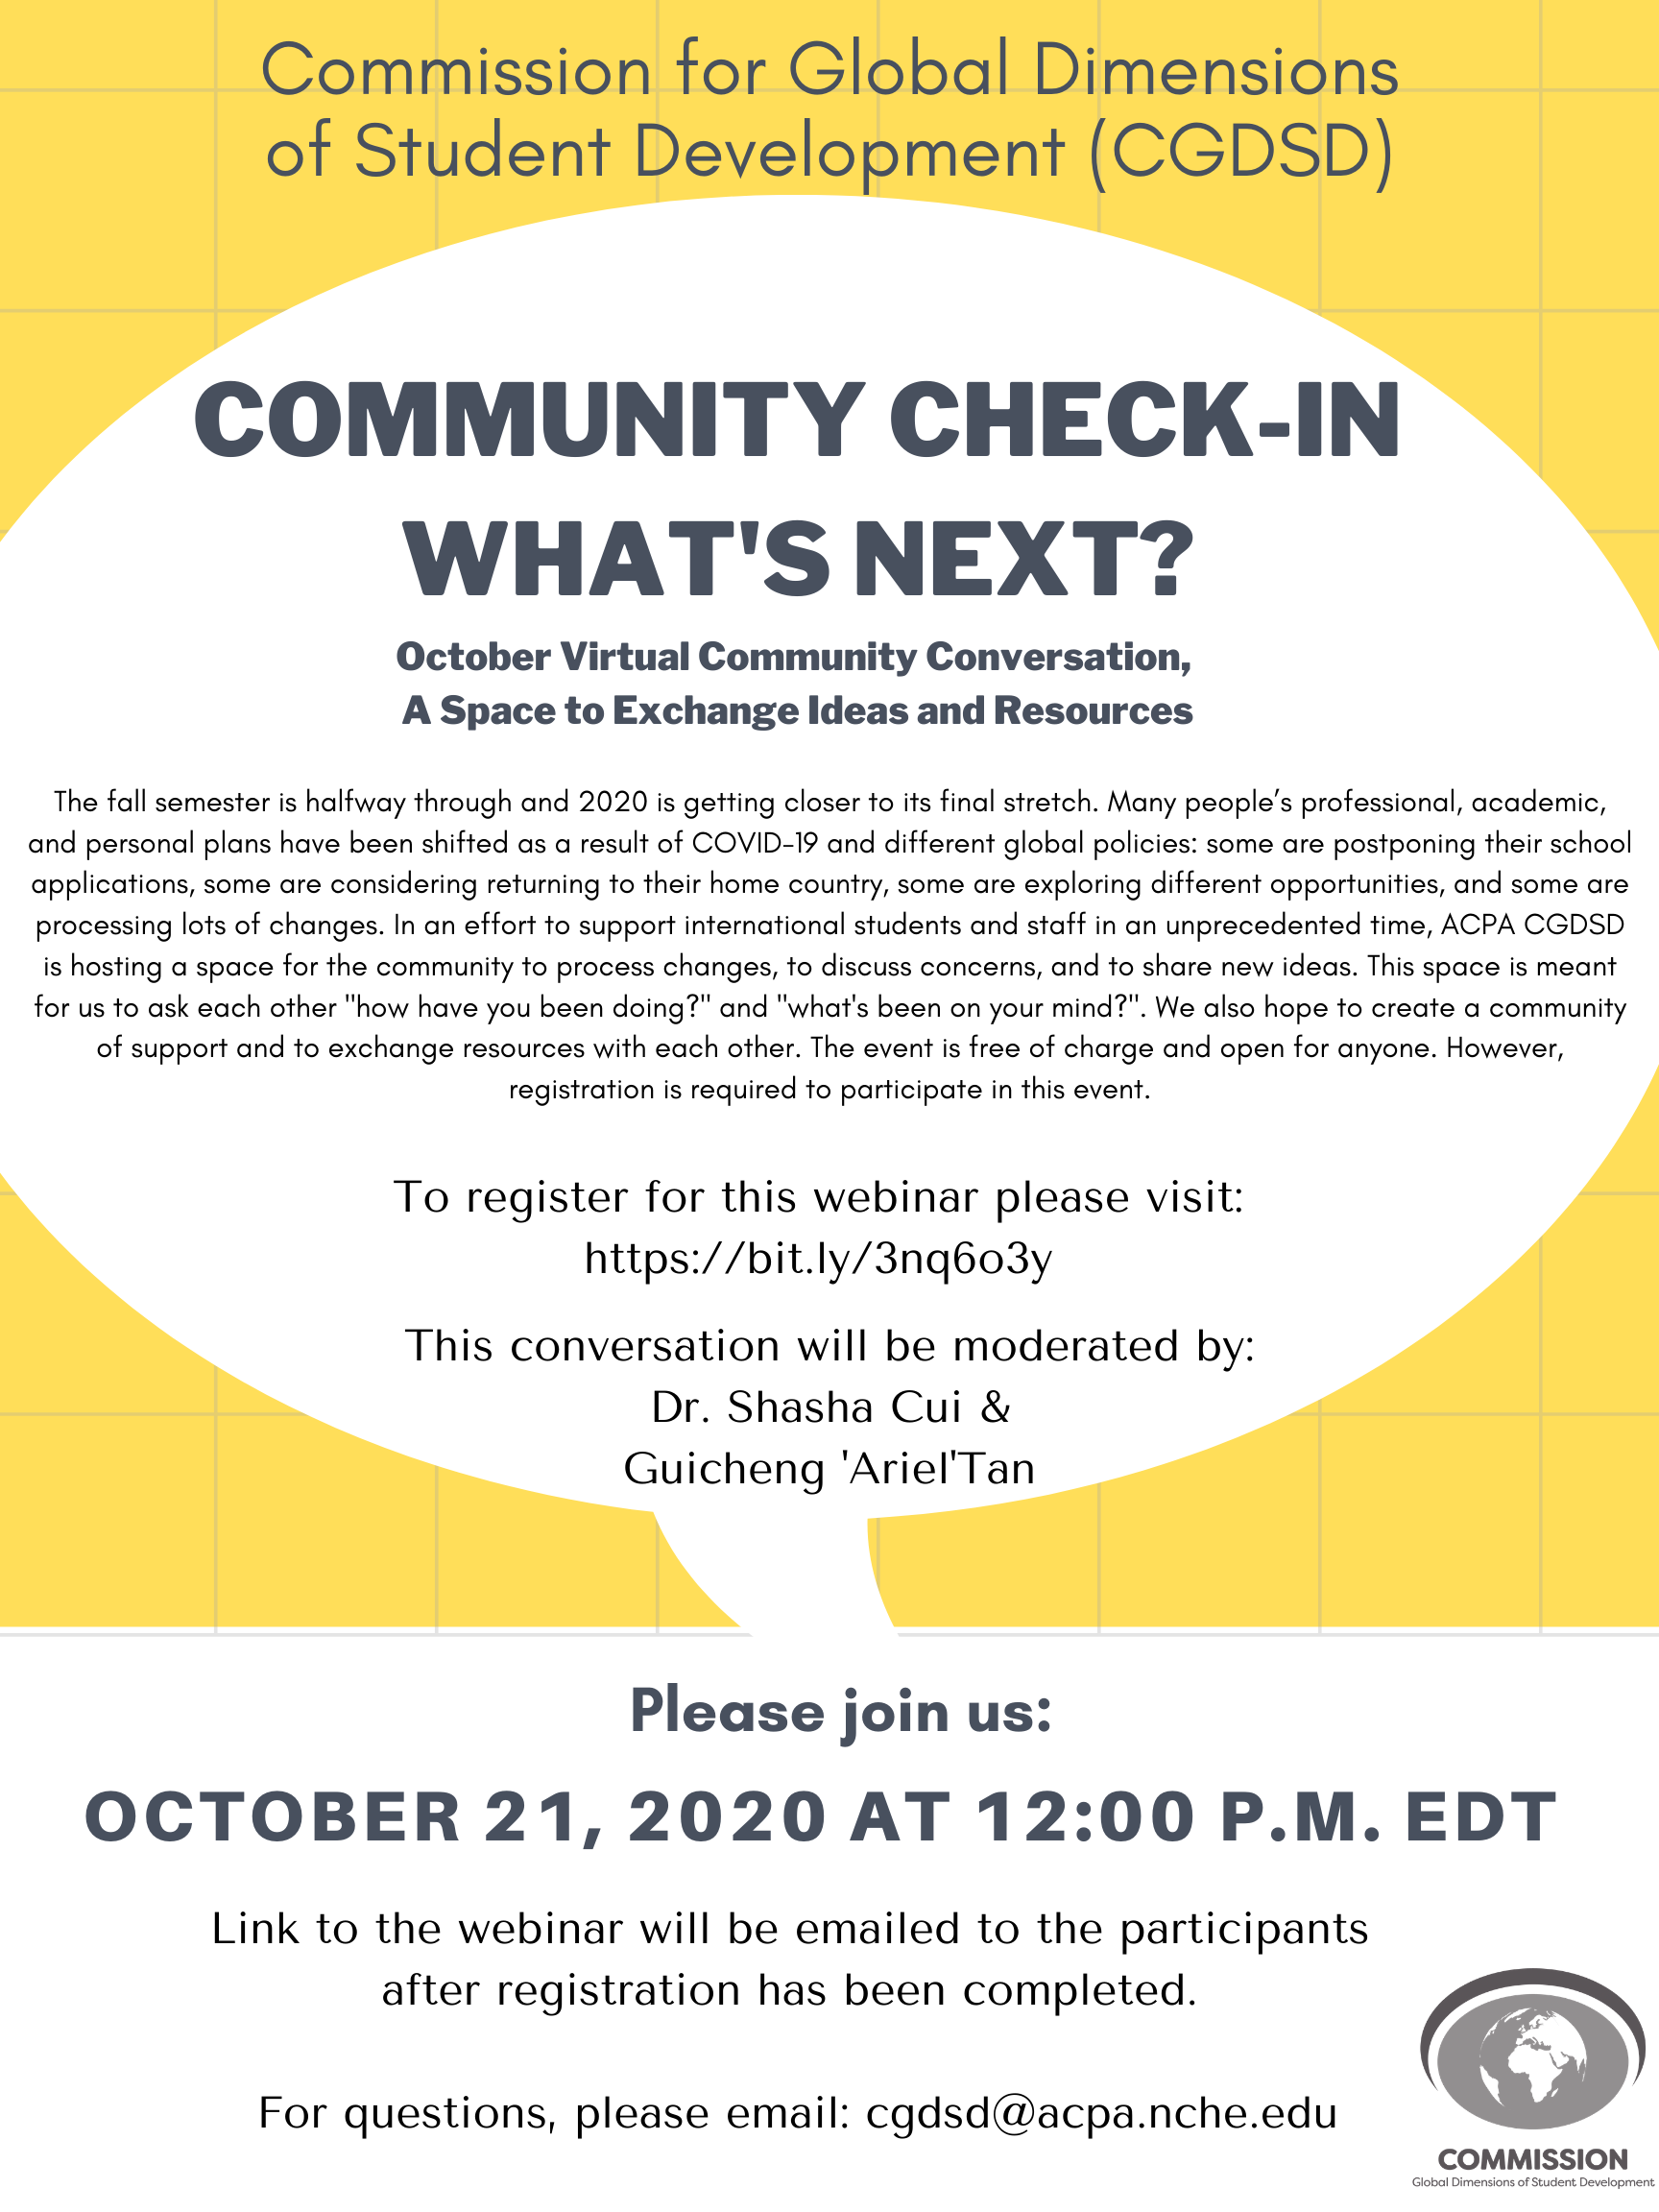 Community Check-in Poster